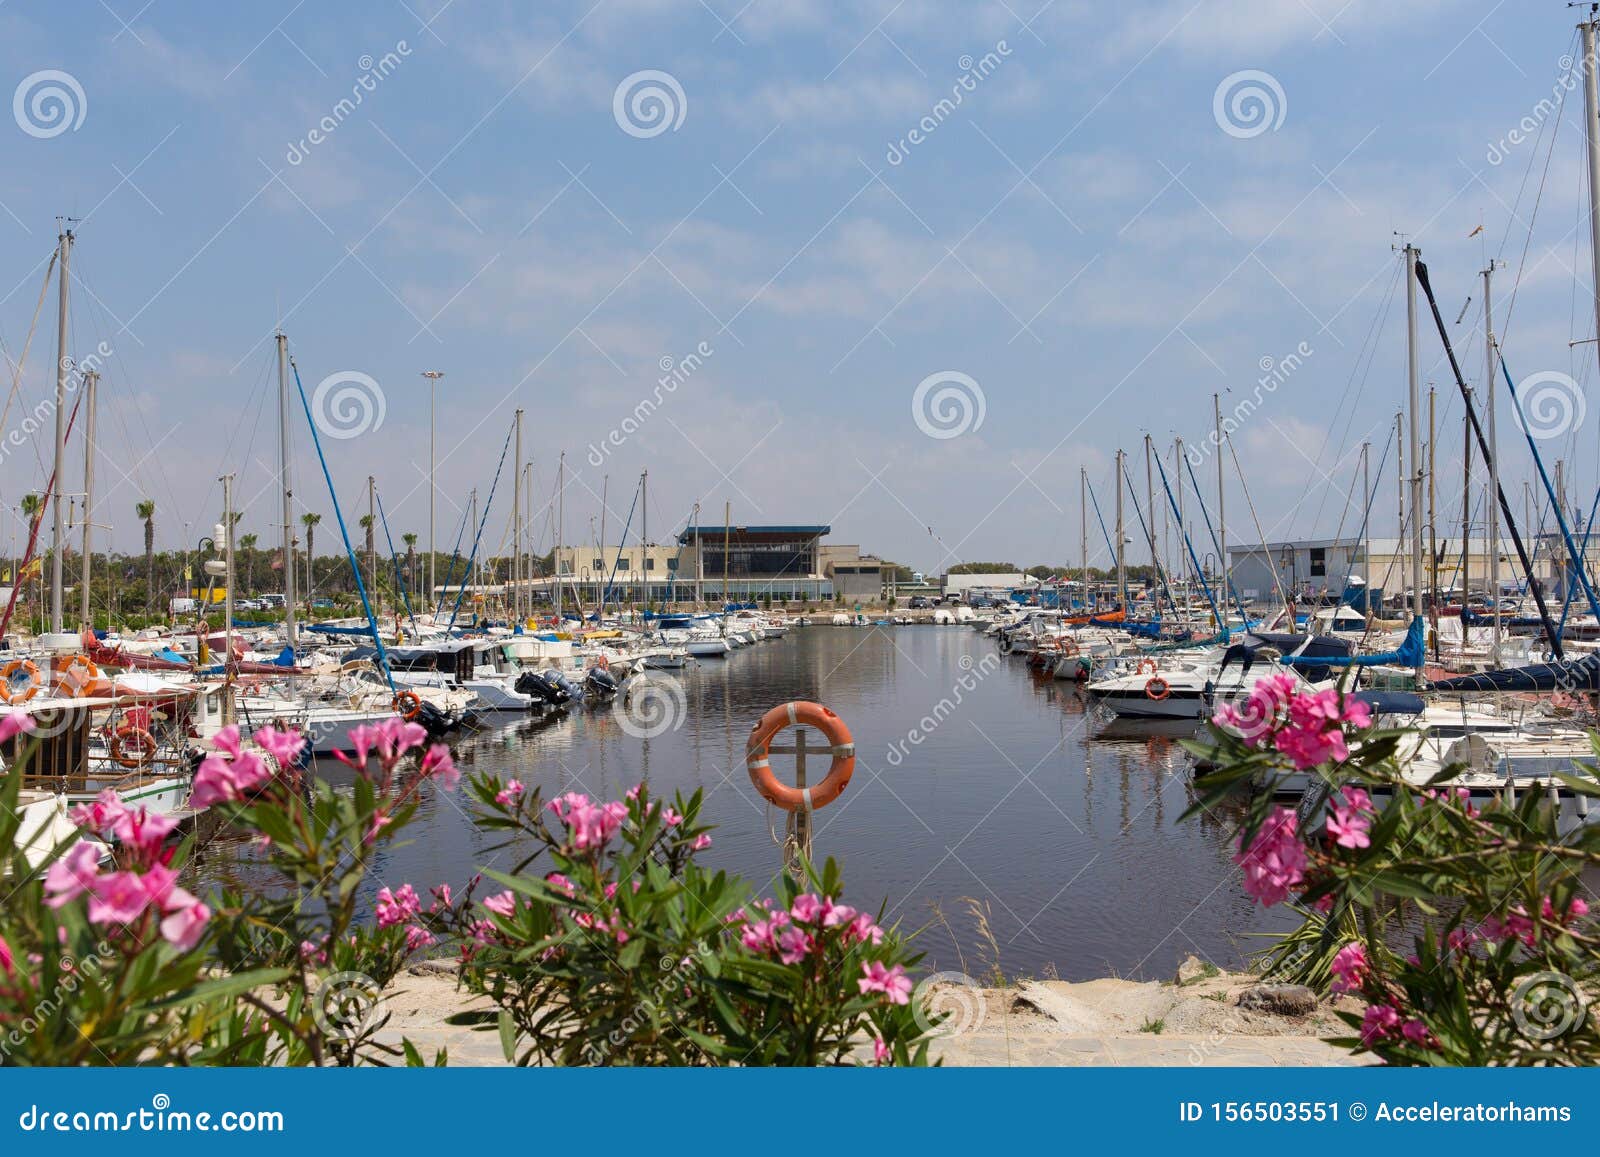 guardamar del segura marina de las dunas with boats and yachts and pink flowers spain